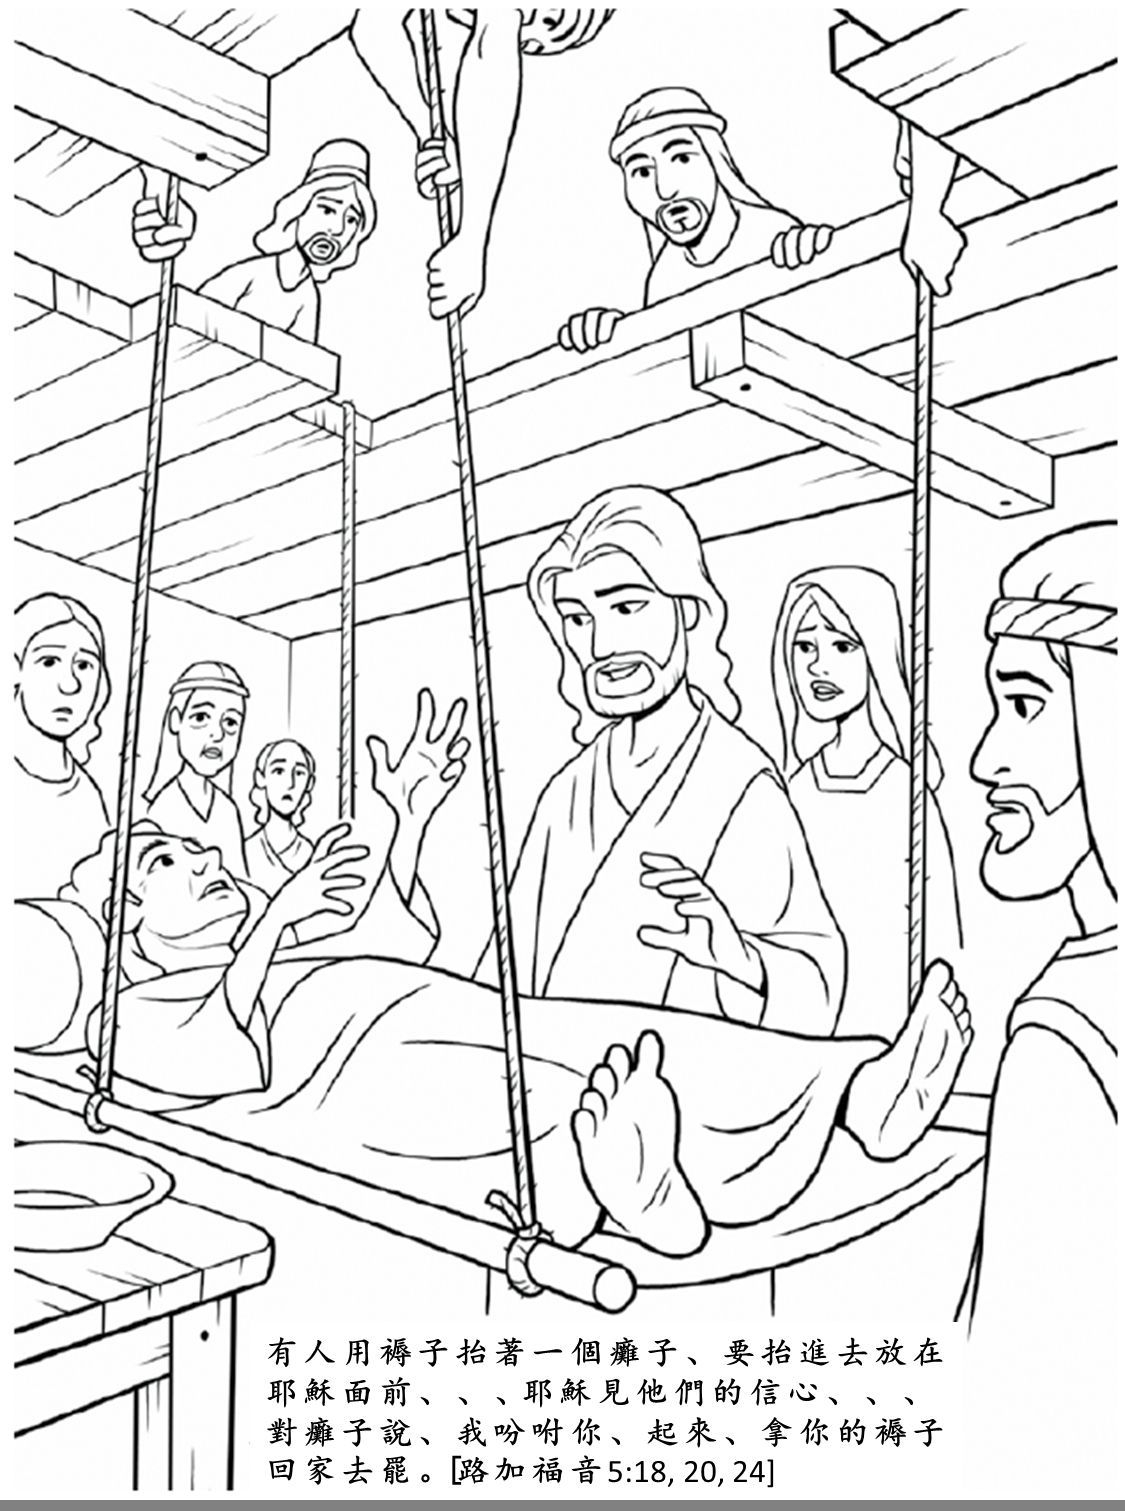 Jesus Heals The Leper Coloring Page Jesus Heals Coloring Page At Getdrawings Free For Personal Use